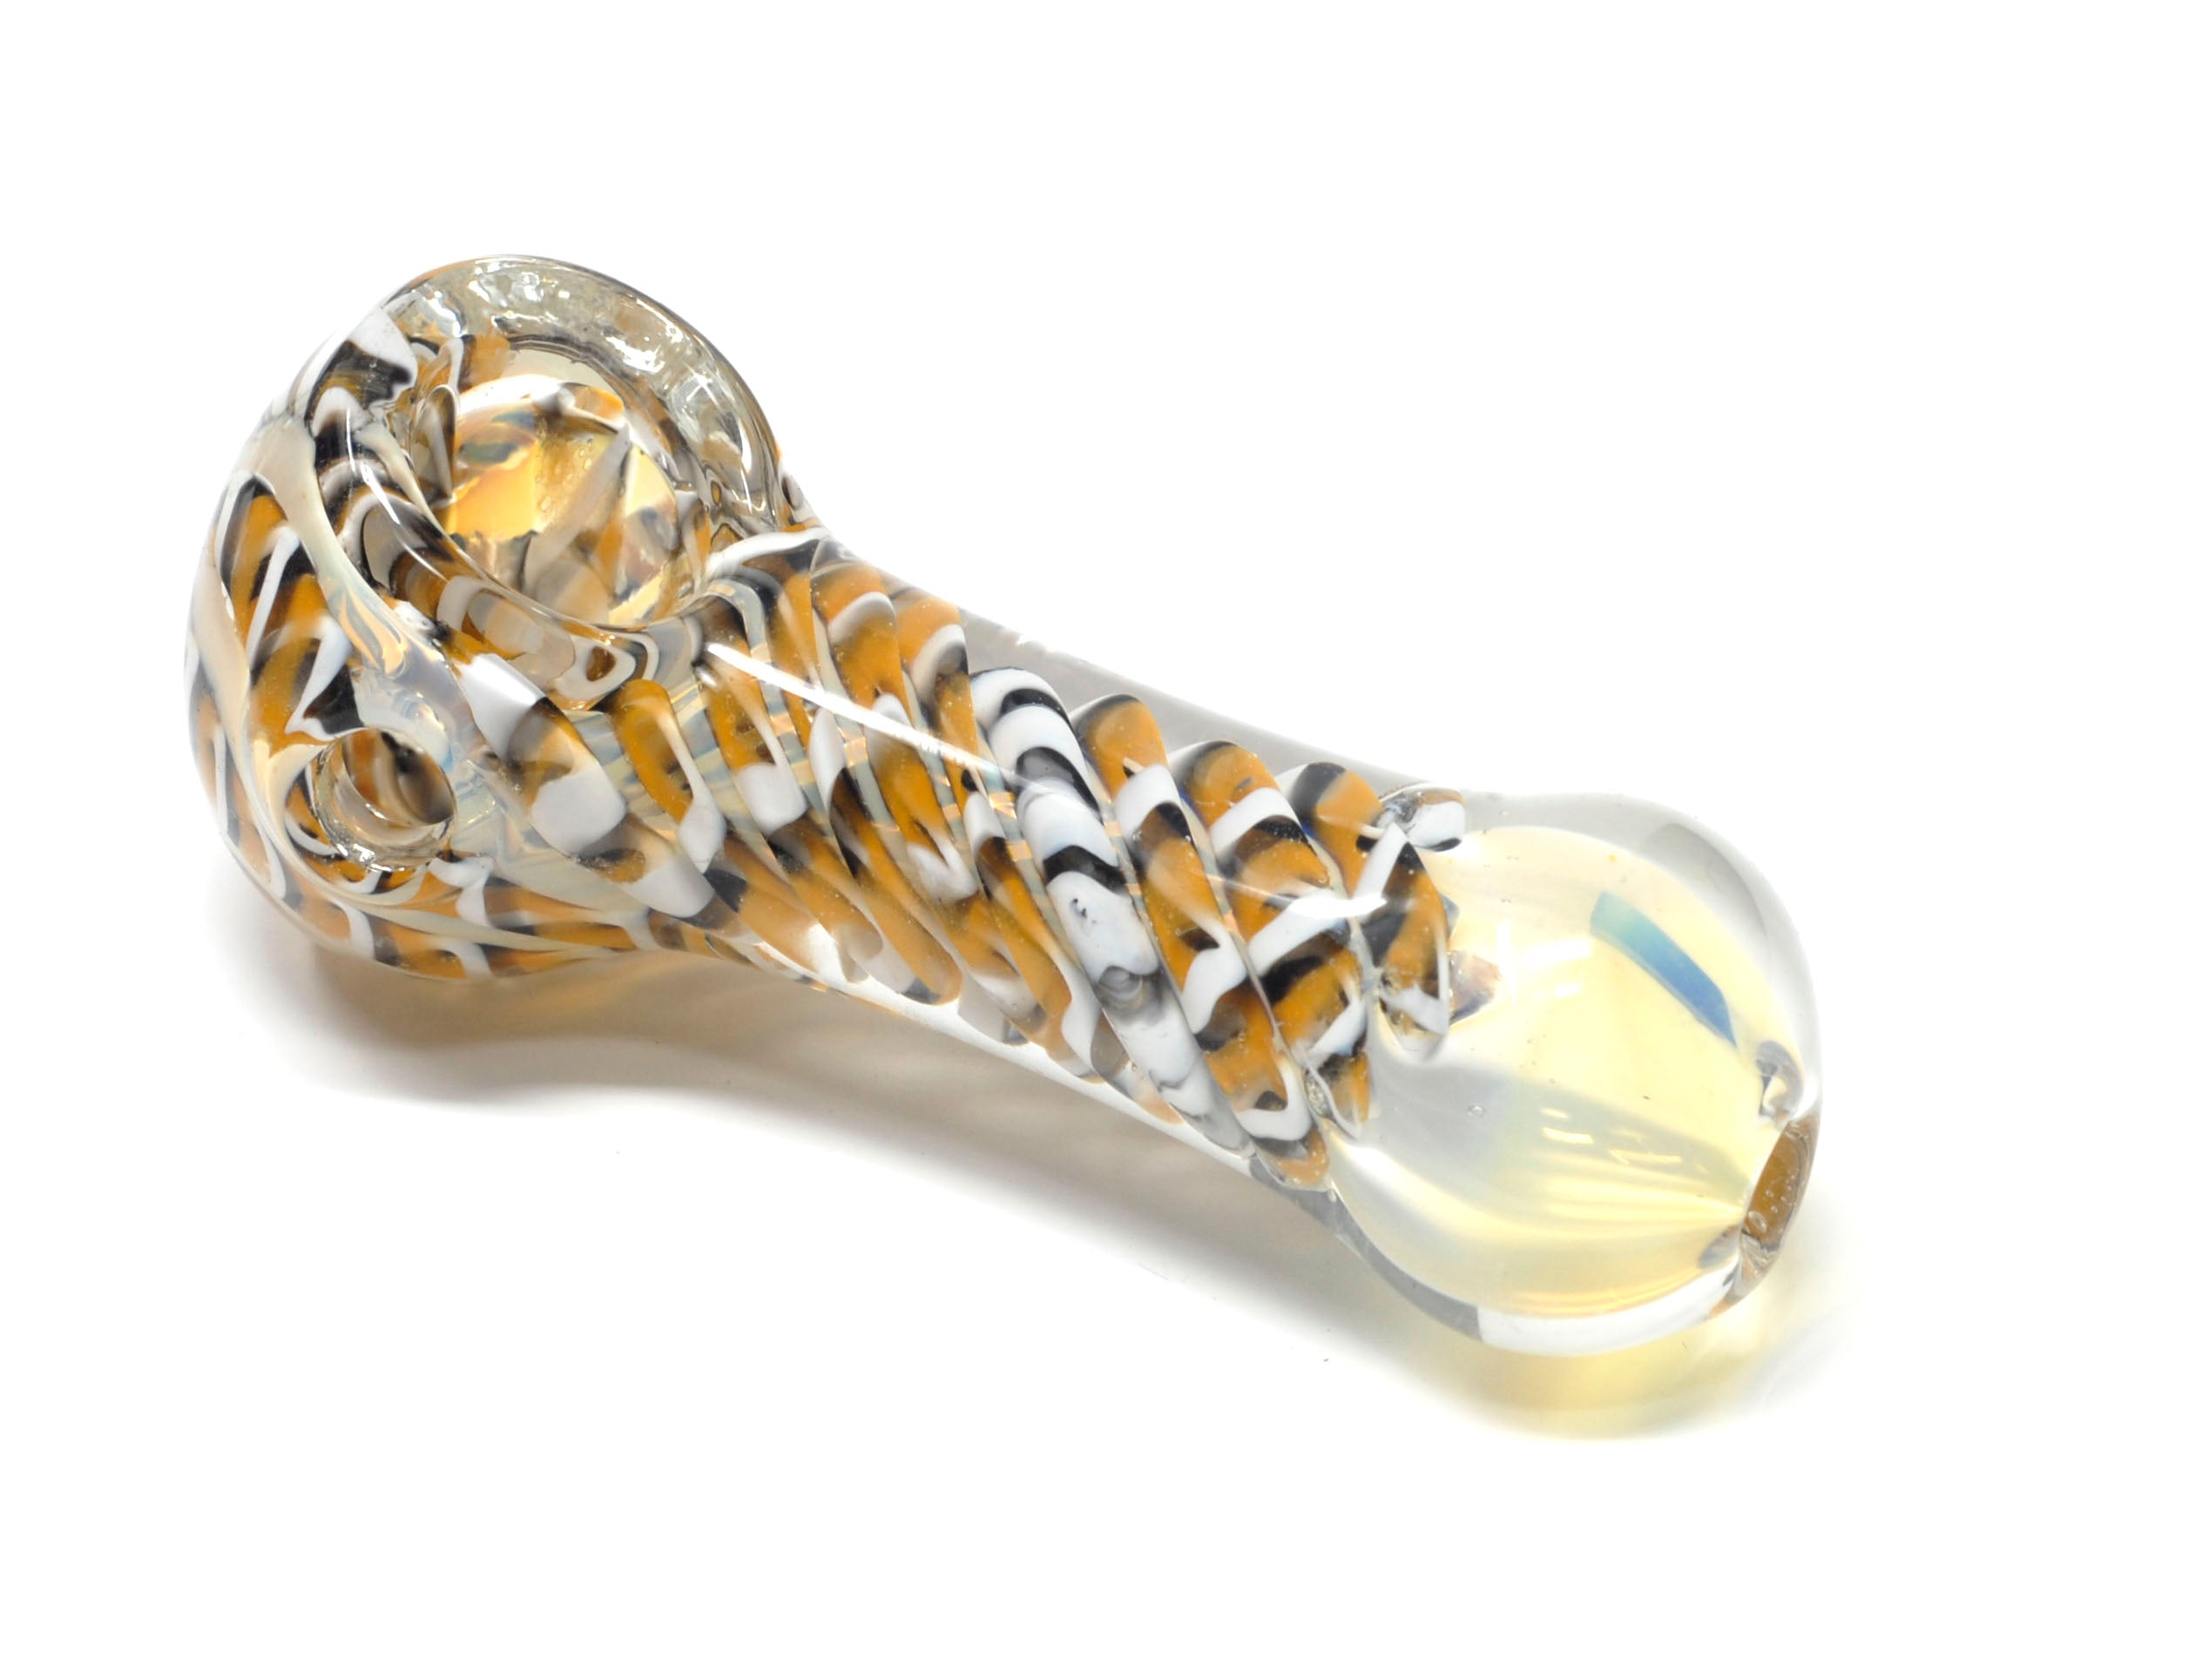 3.5 INCHES HEAVY HAND PIPE